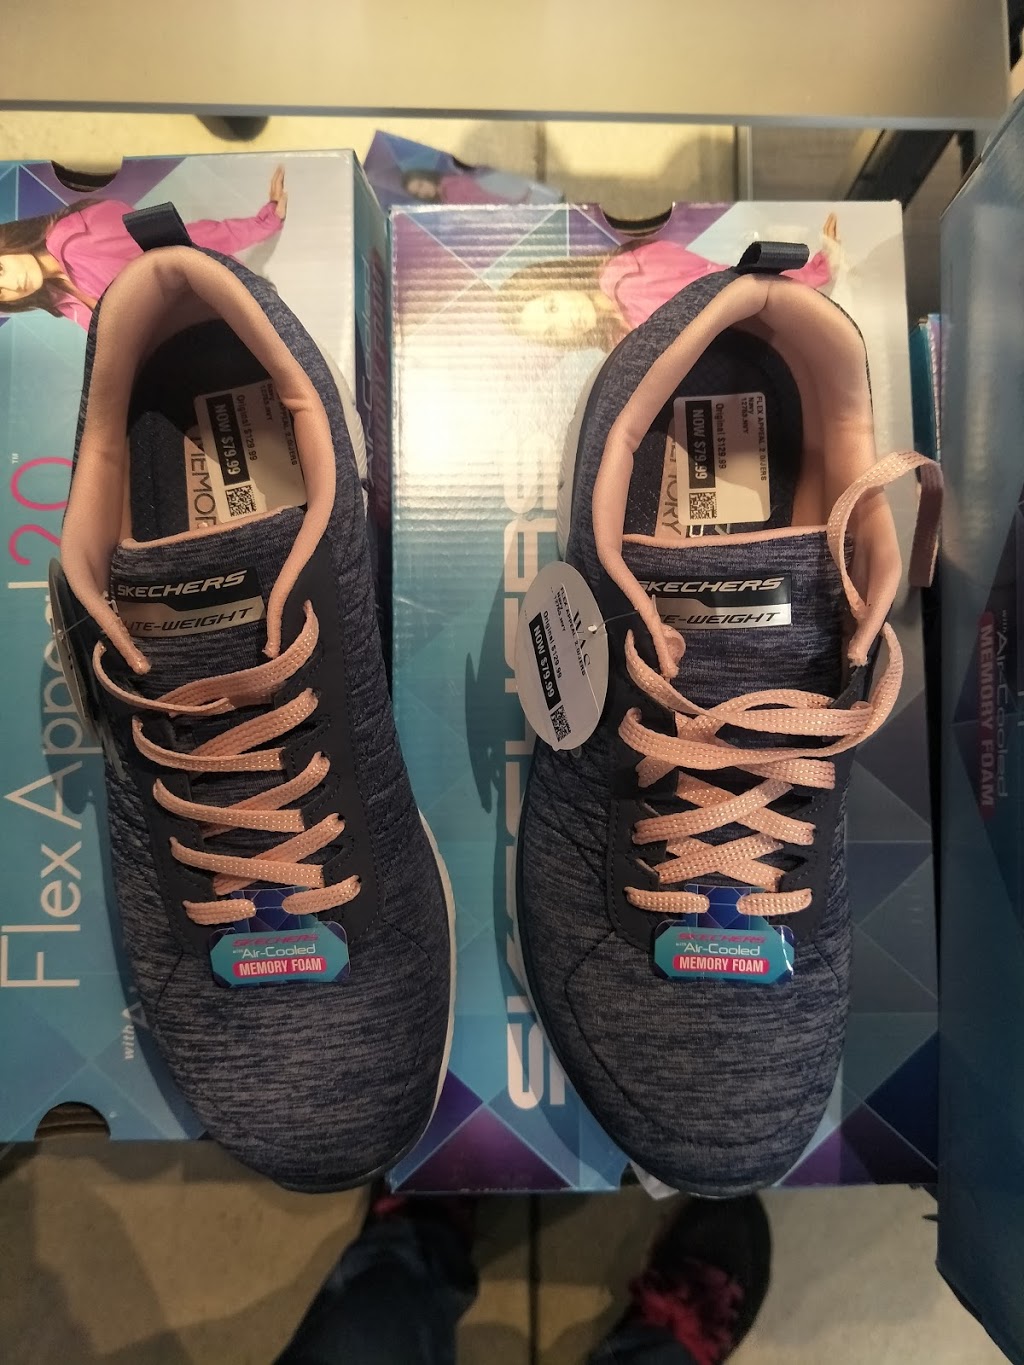 skechers shoes stockists qld